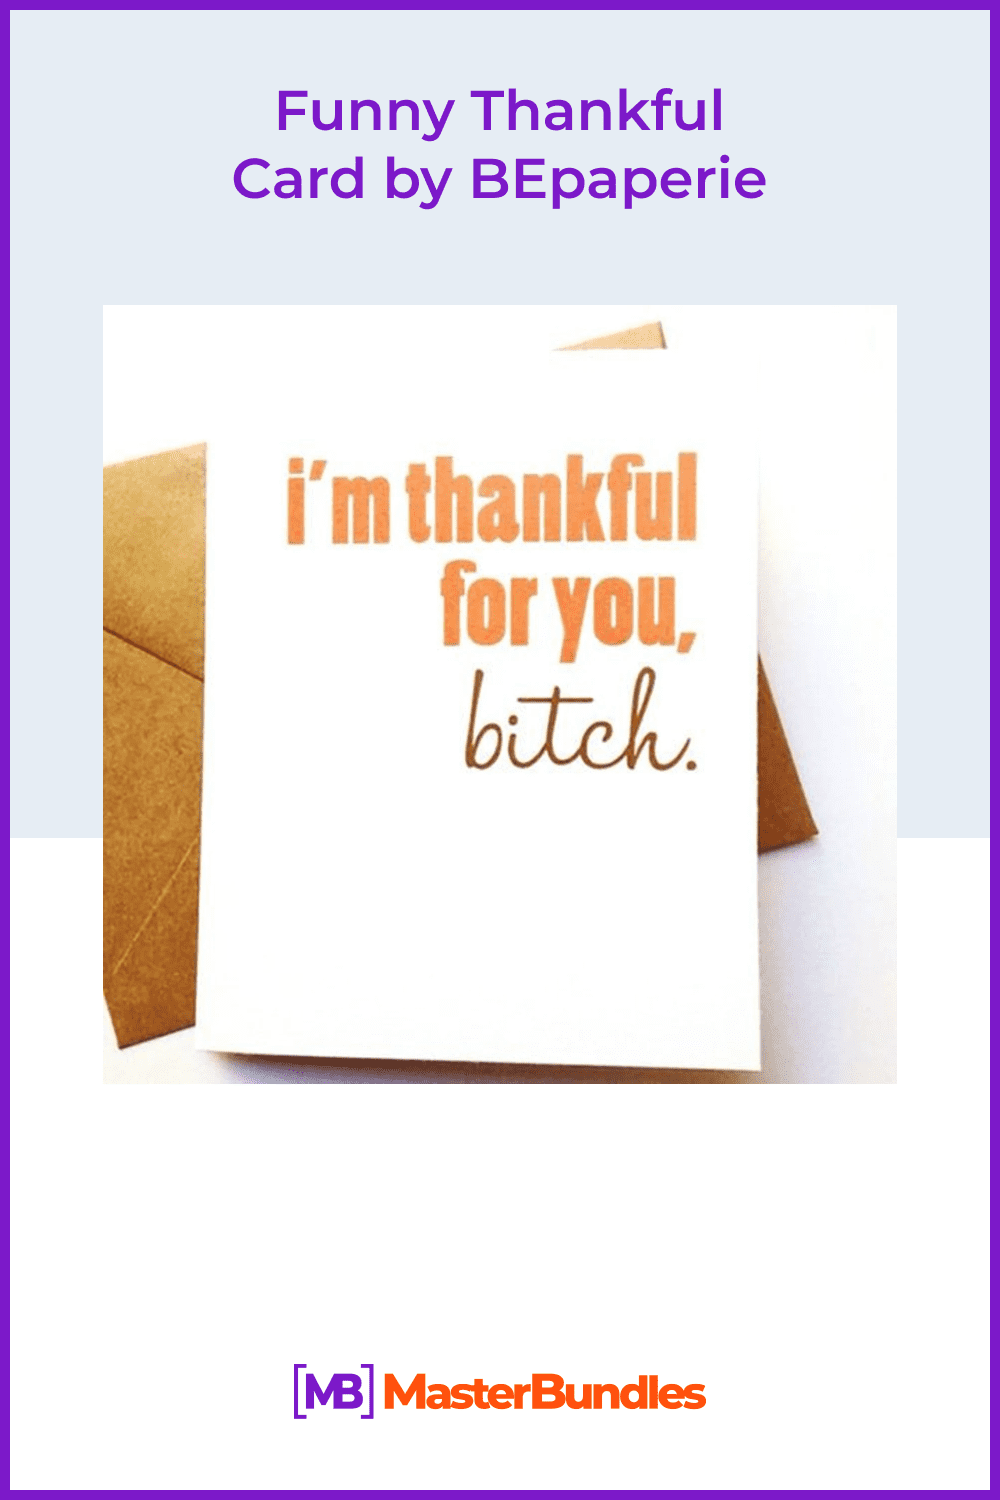 Funny thankful card by BEpaperie.